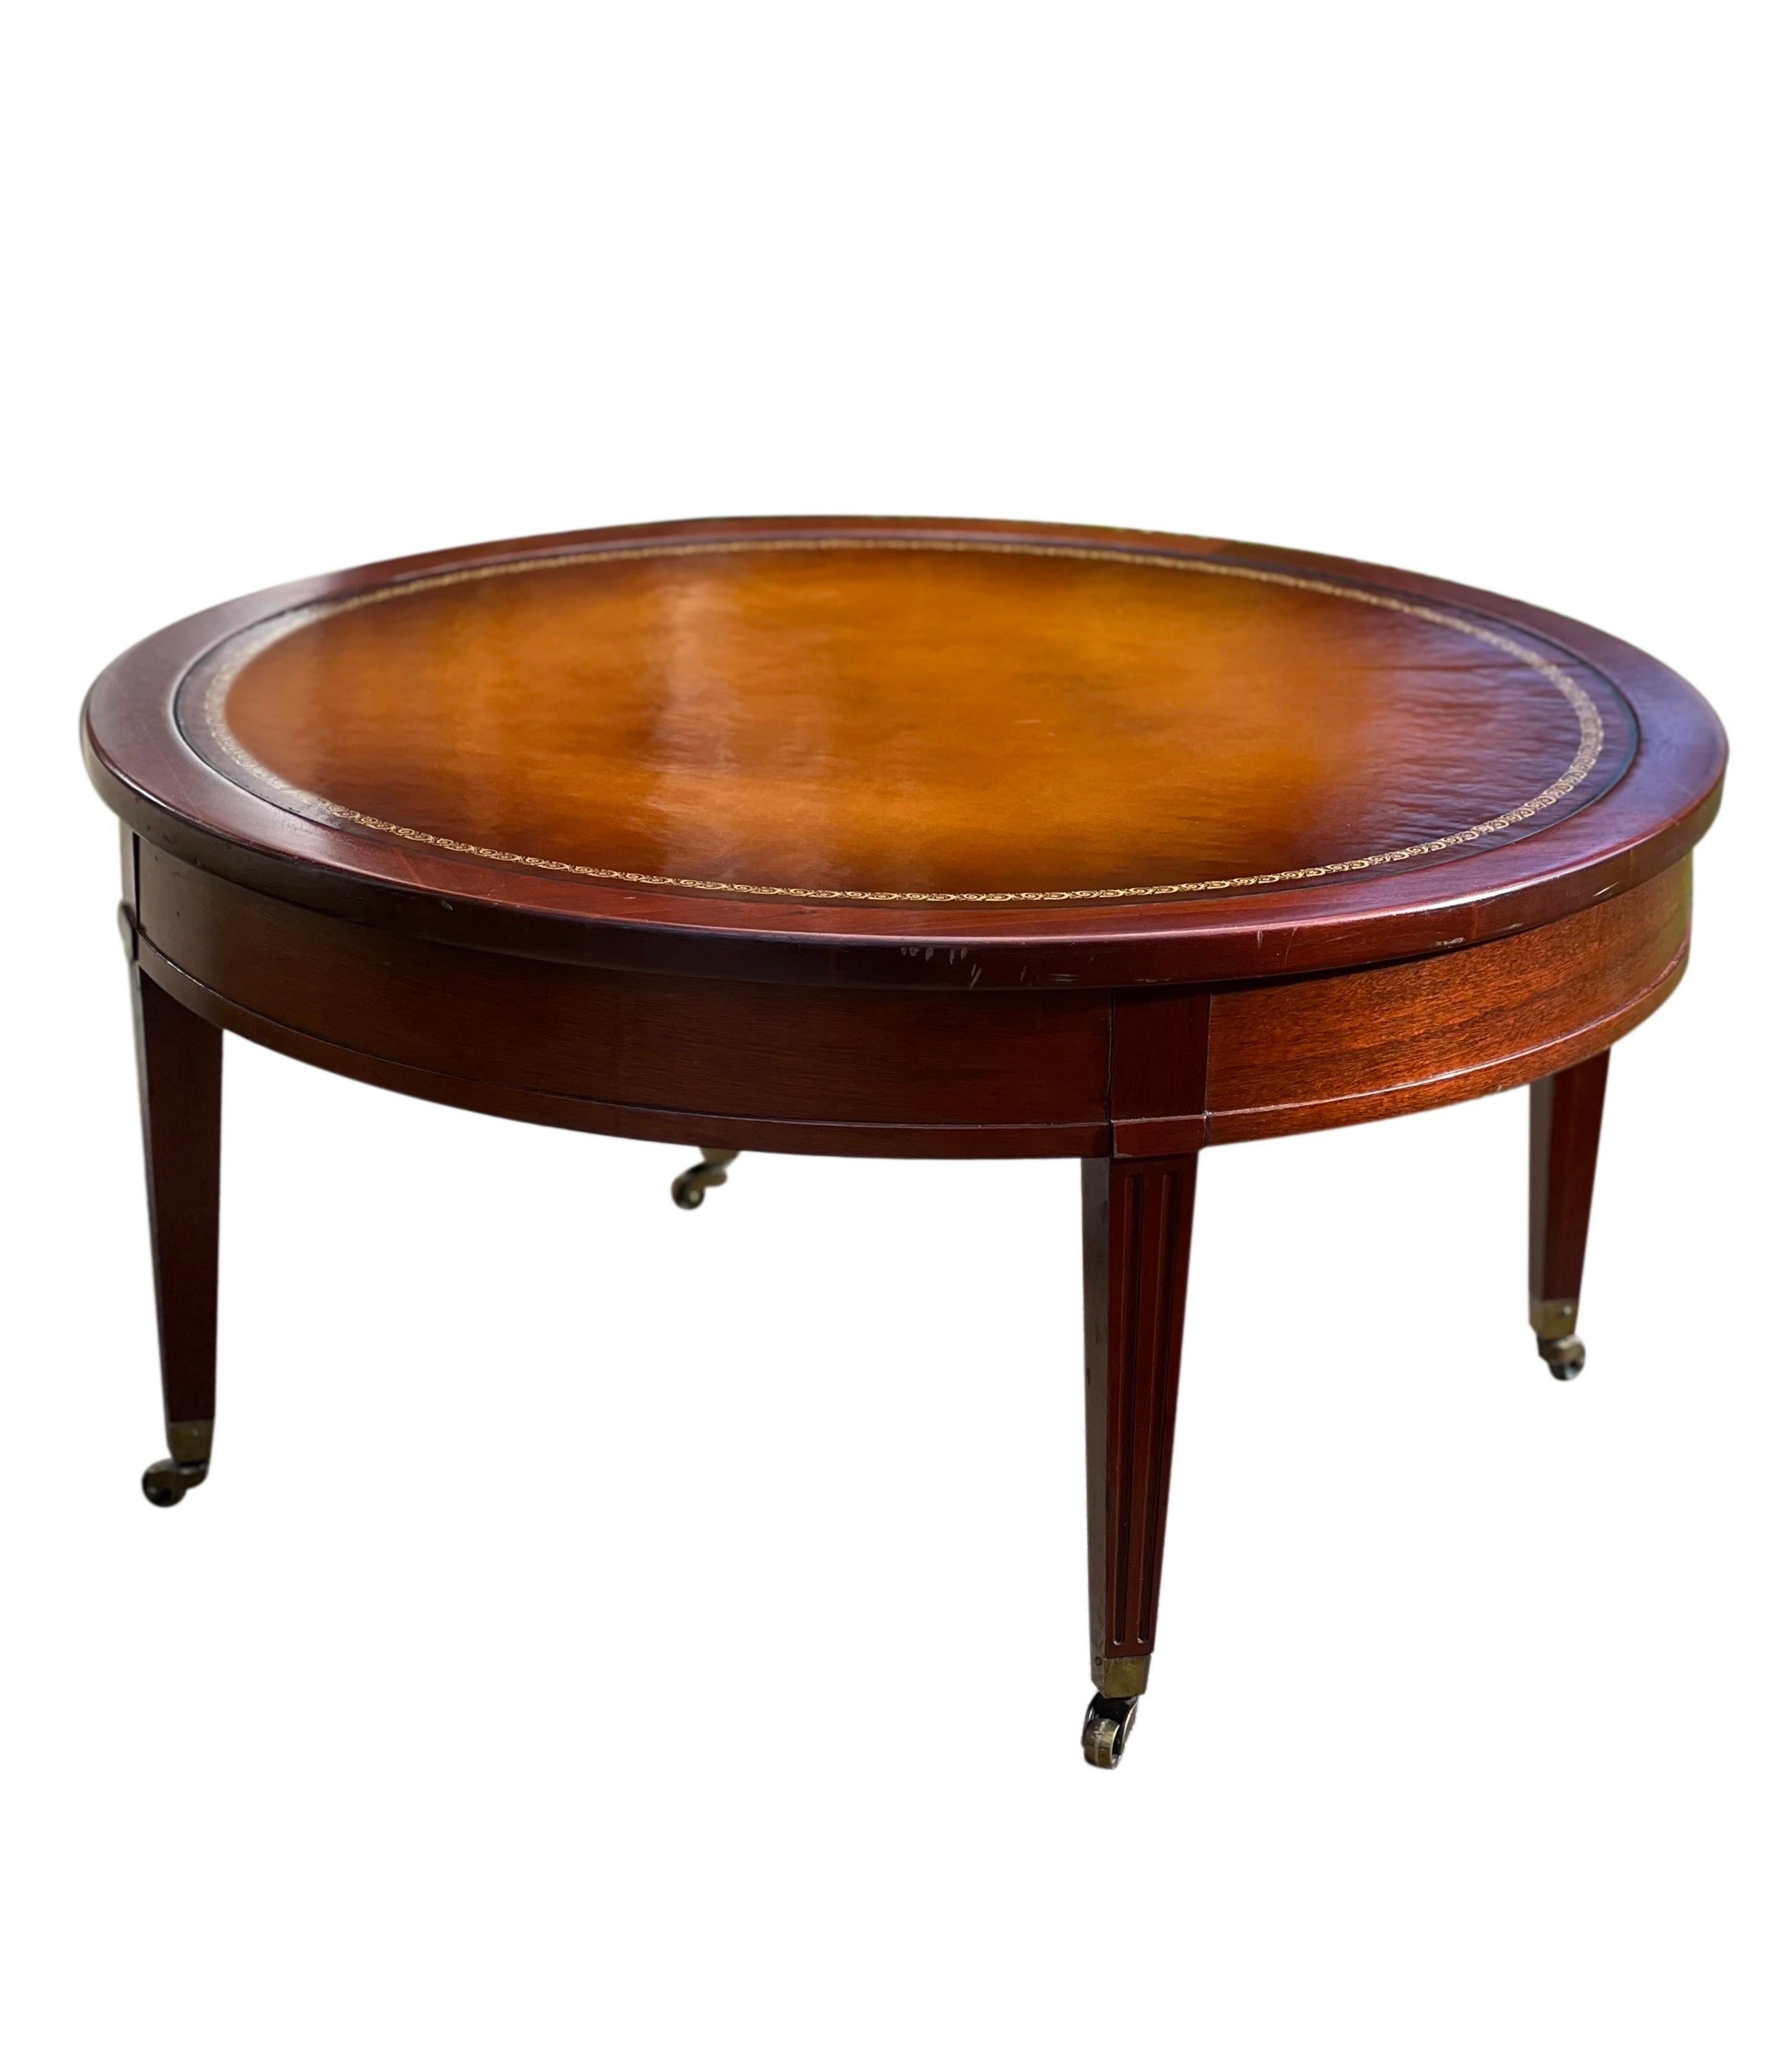 Handsome mid-century round leather top mahogany coffee table on casters by Mersman. The table features a classic period style with a beautiful inlaid leather top and gold stenciling. An elegant, well-crafted piece in very good vintage condition.